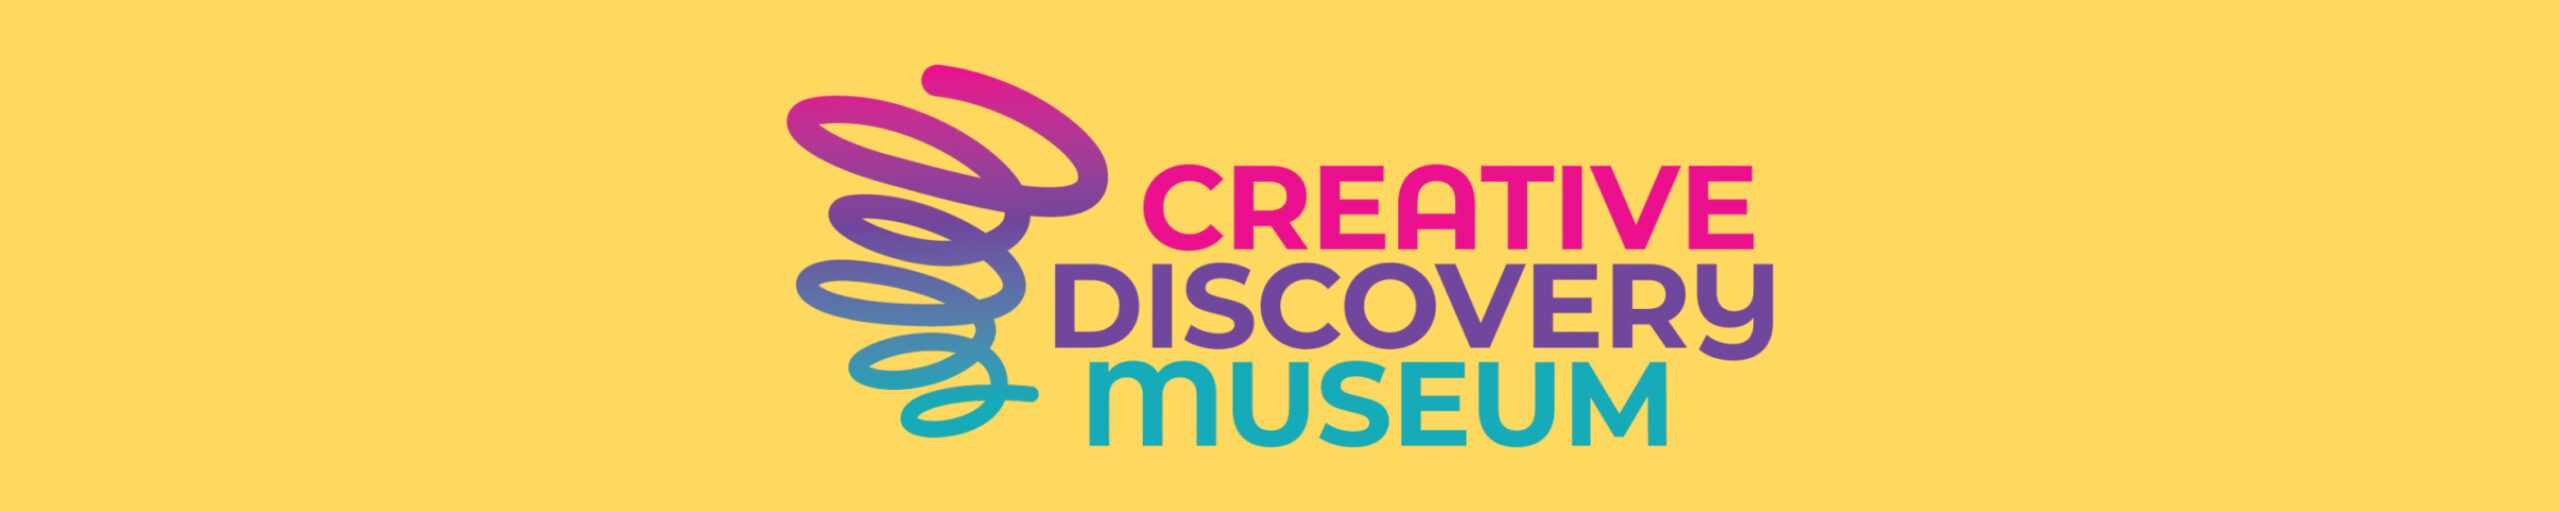 Creative Discovery Museum ad